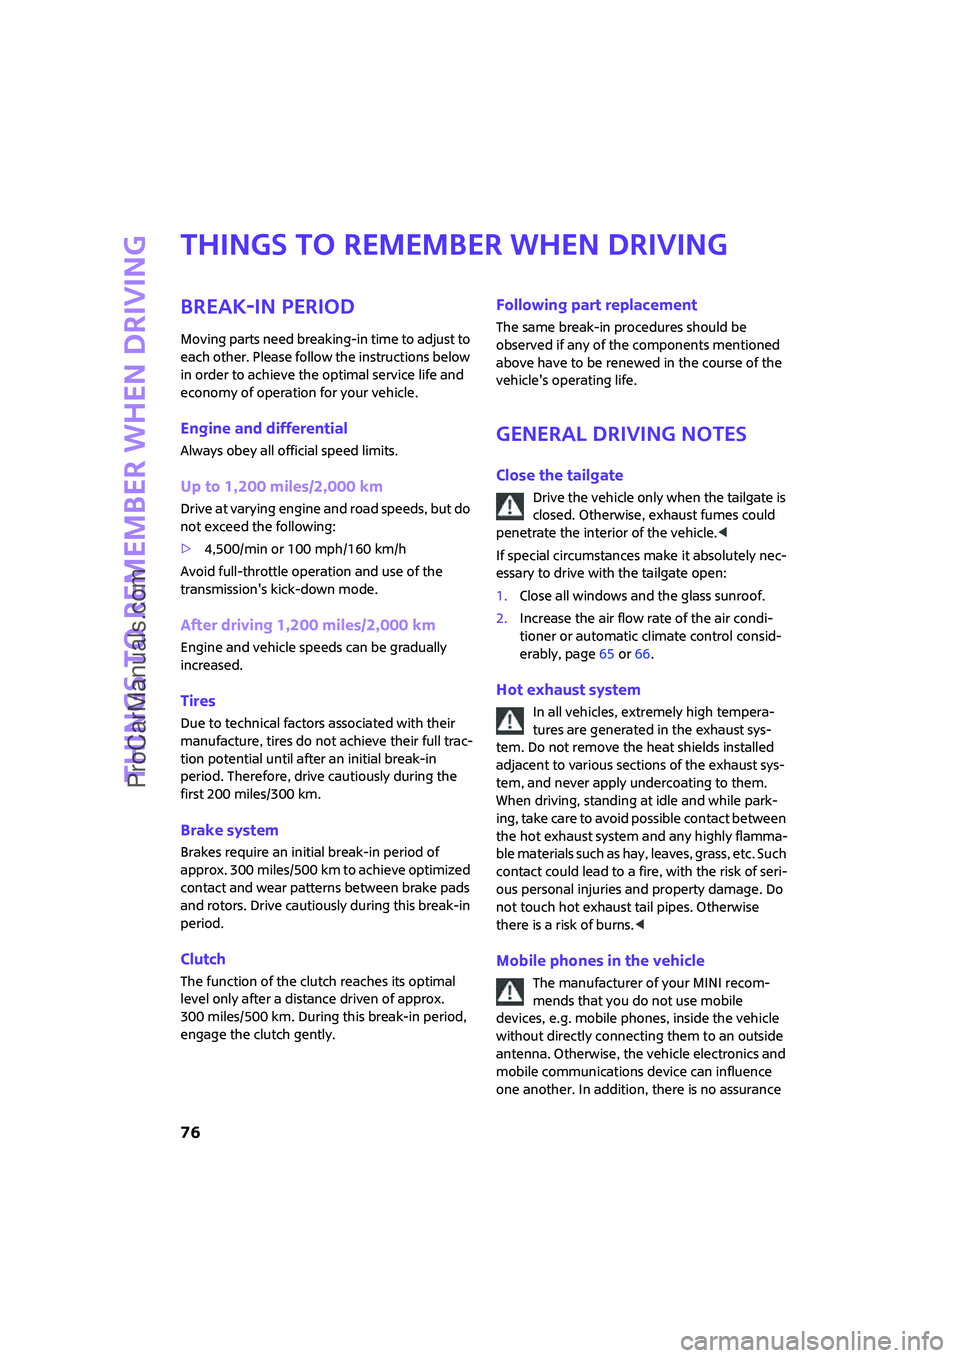 MINI COOPER 2007  Owners Manual Things to remember when driving
76
Things to remember when driving
Break-in period
Moving parts need breaking-in time to adjust to 
each other. Please follow the instructions below 
in order to achiev